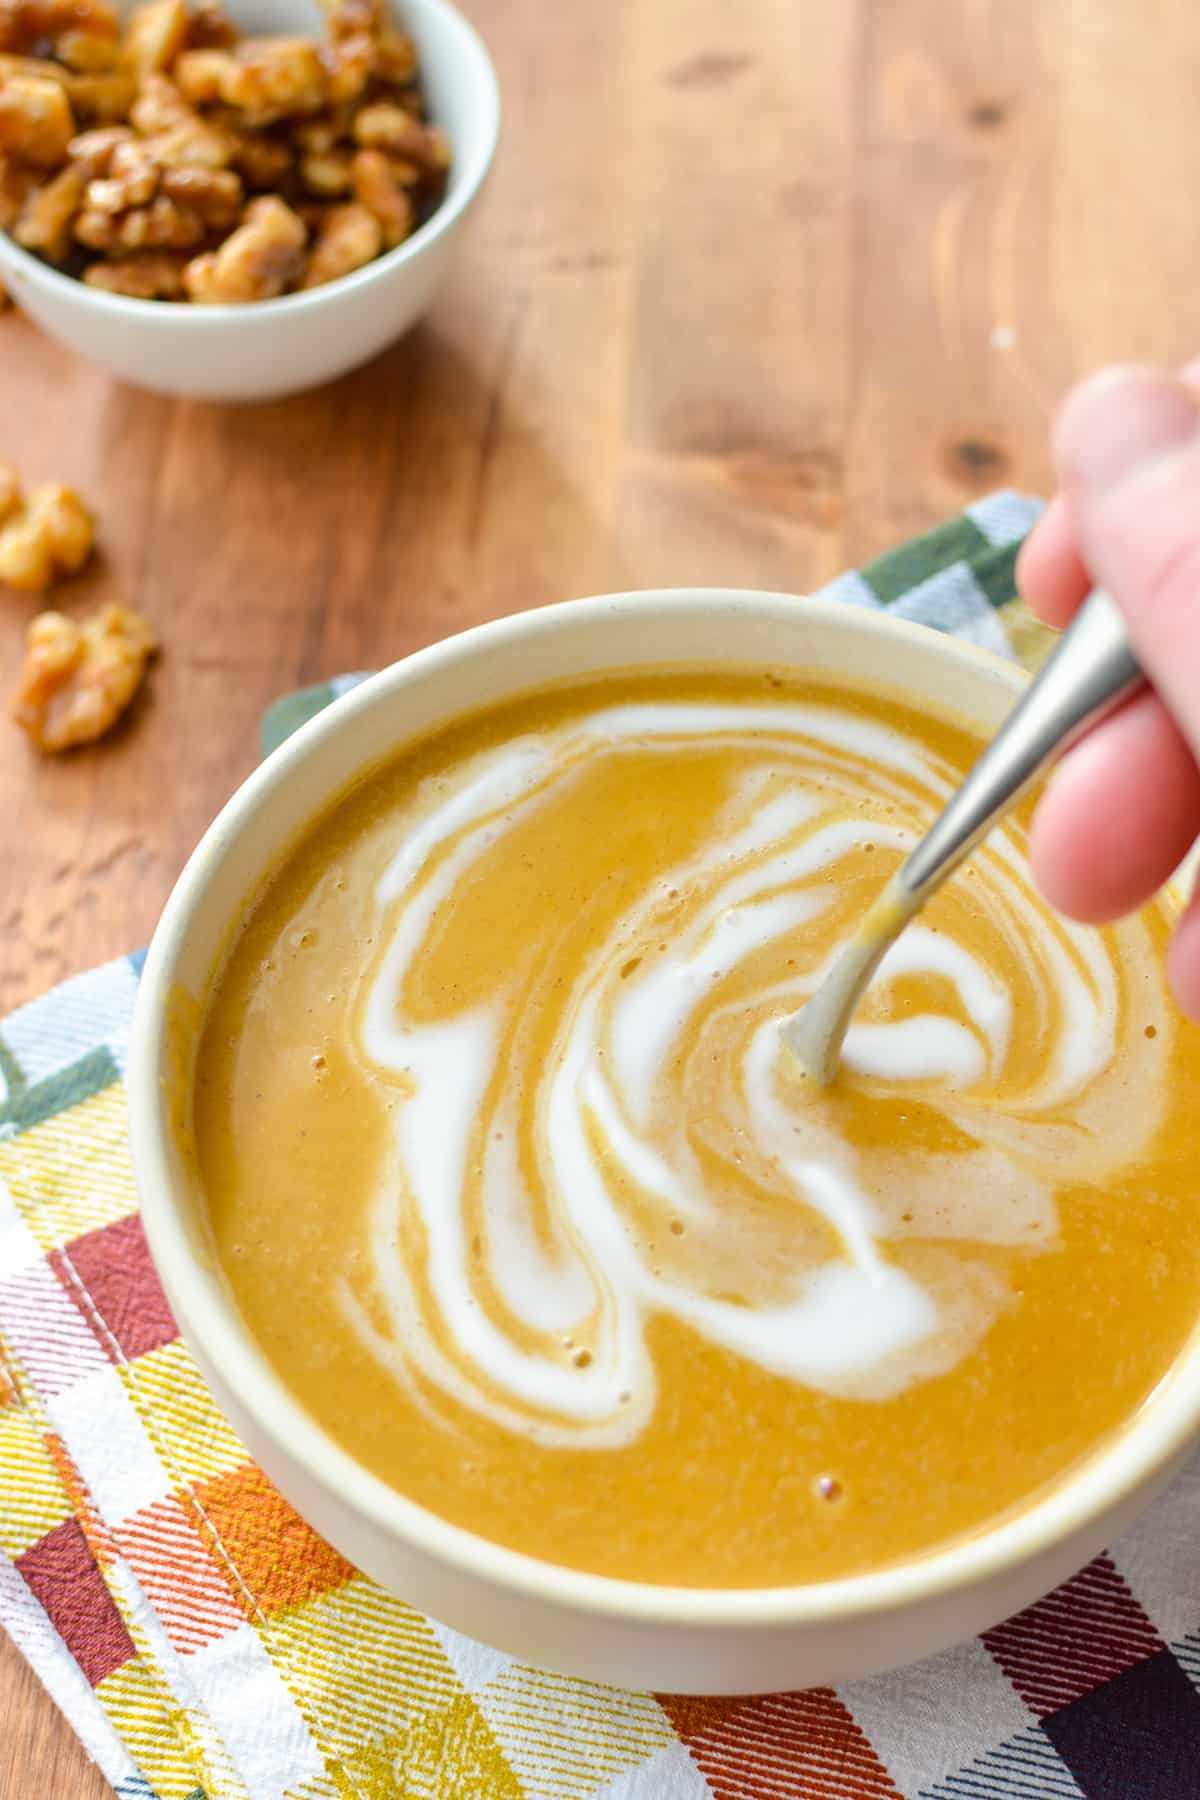 A hand stirring a spoon in a bowl of butternut squash soup.